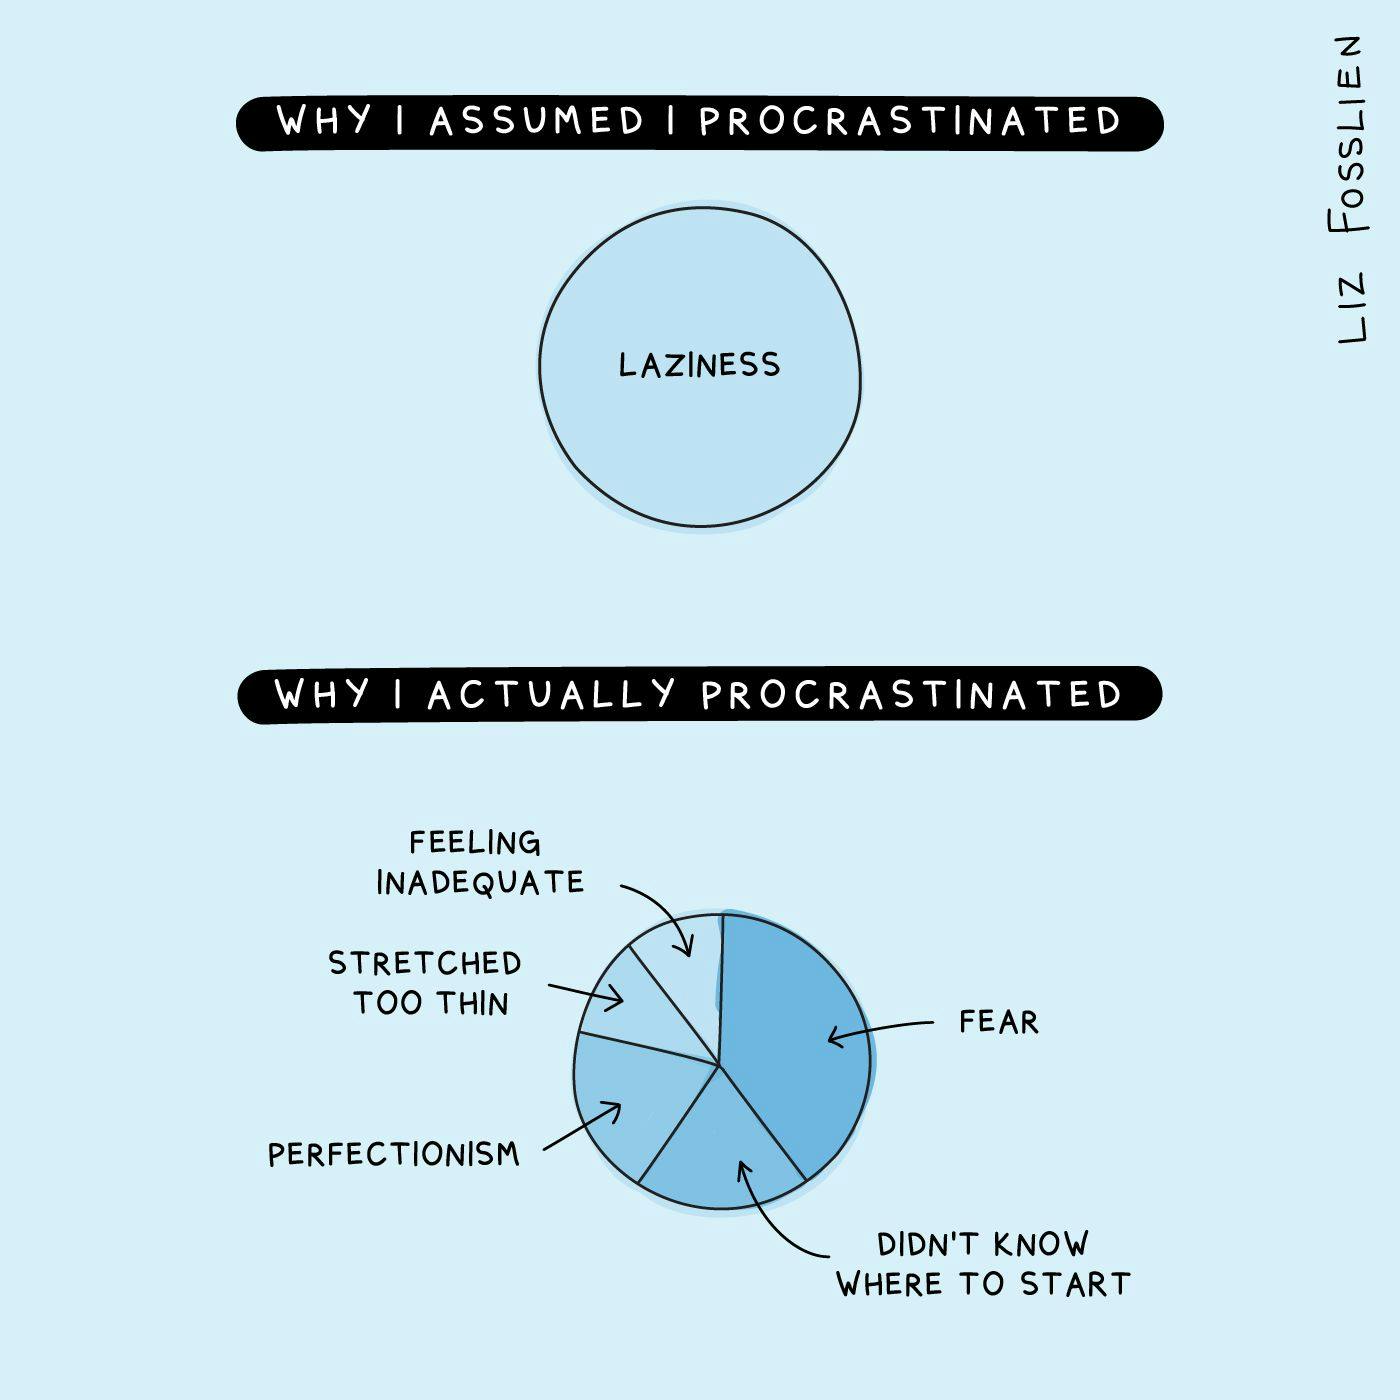 A heading 'Why I assumed I procrastinated' sits above a pie chart with the whole pie filled with LAZINESS. Below this, a heading reads 'Why I actually procrastinated' and features a pie chart with several thoughts and emotions, such as fear and perfectionism.